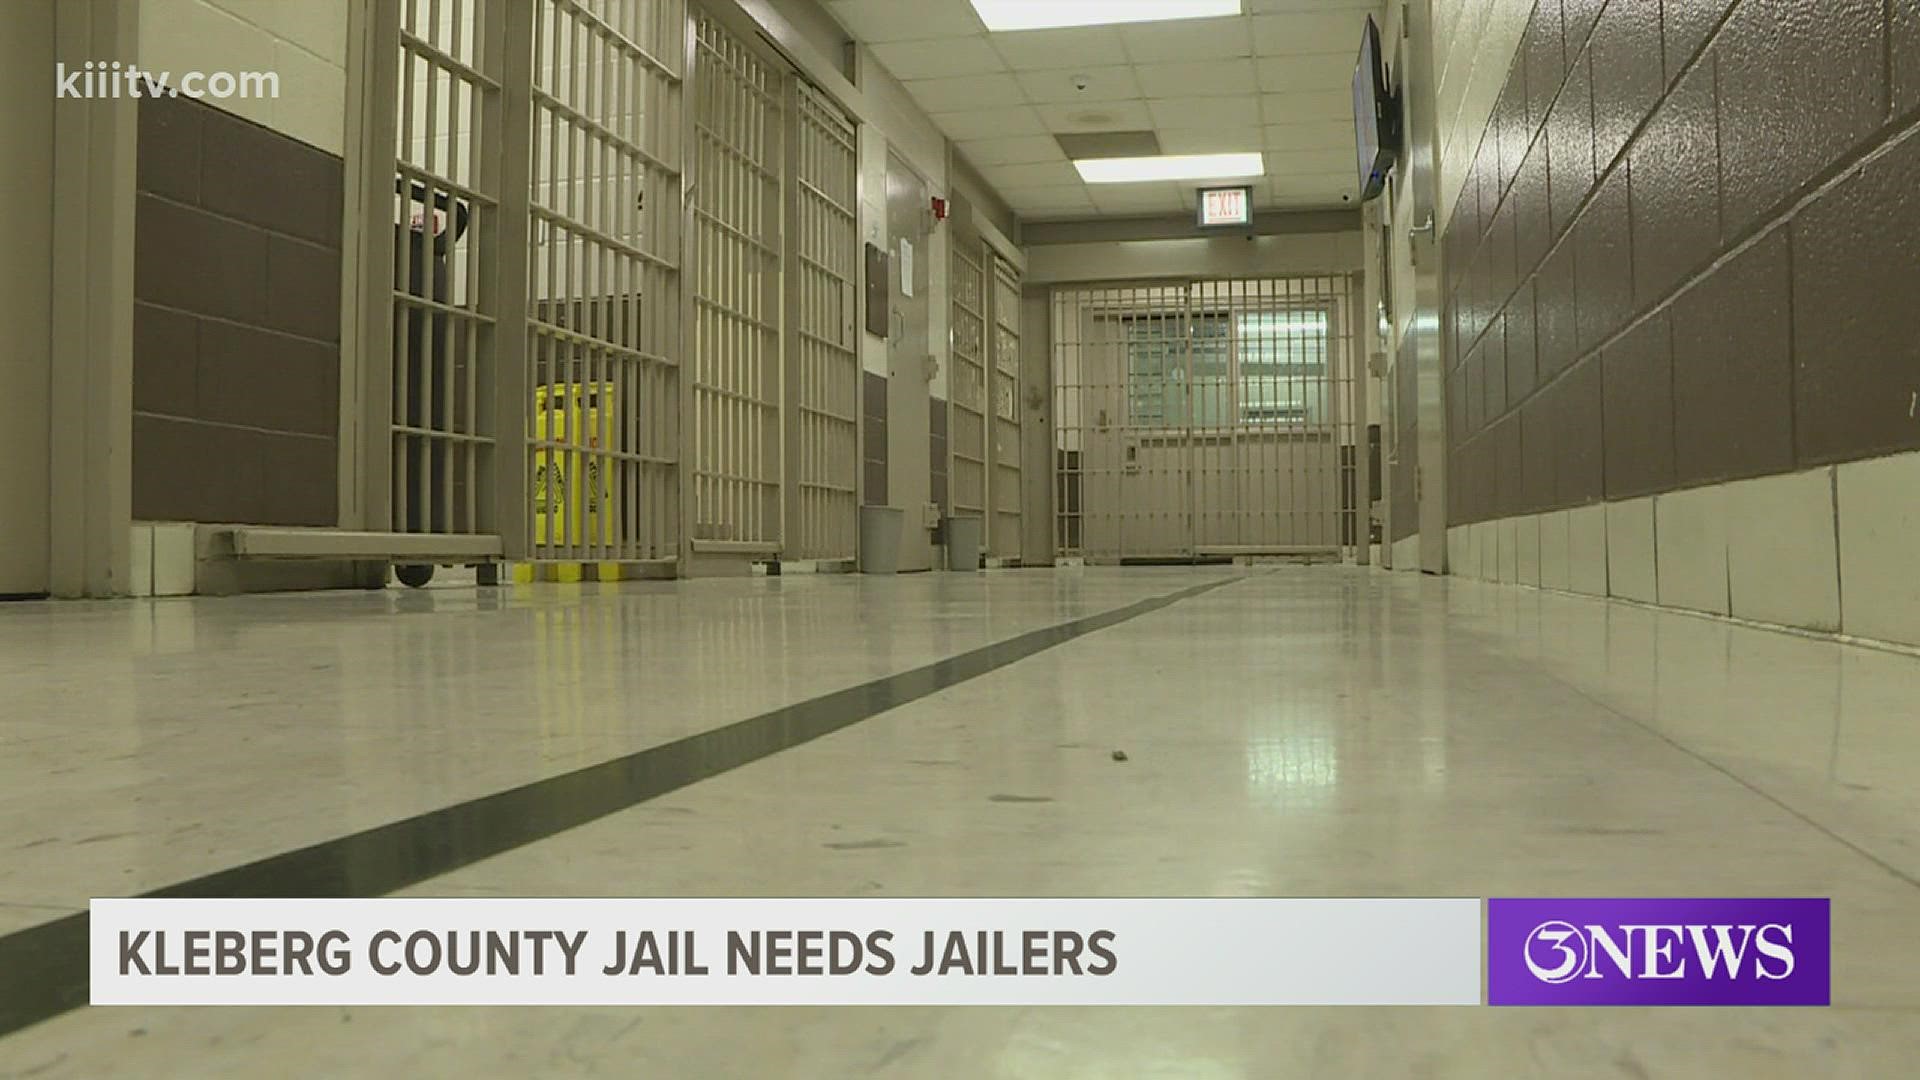 Six positions currently remain open in Kleberg County. In an effort to fill those vacancies the county has raised starting pay for jailers to 14-50 an hour.